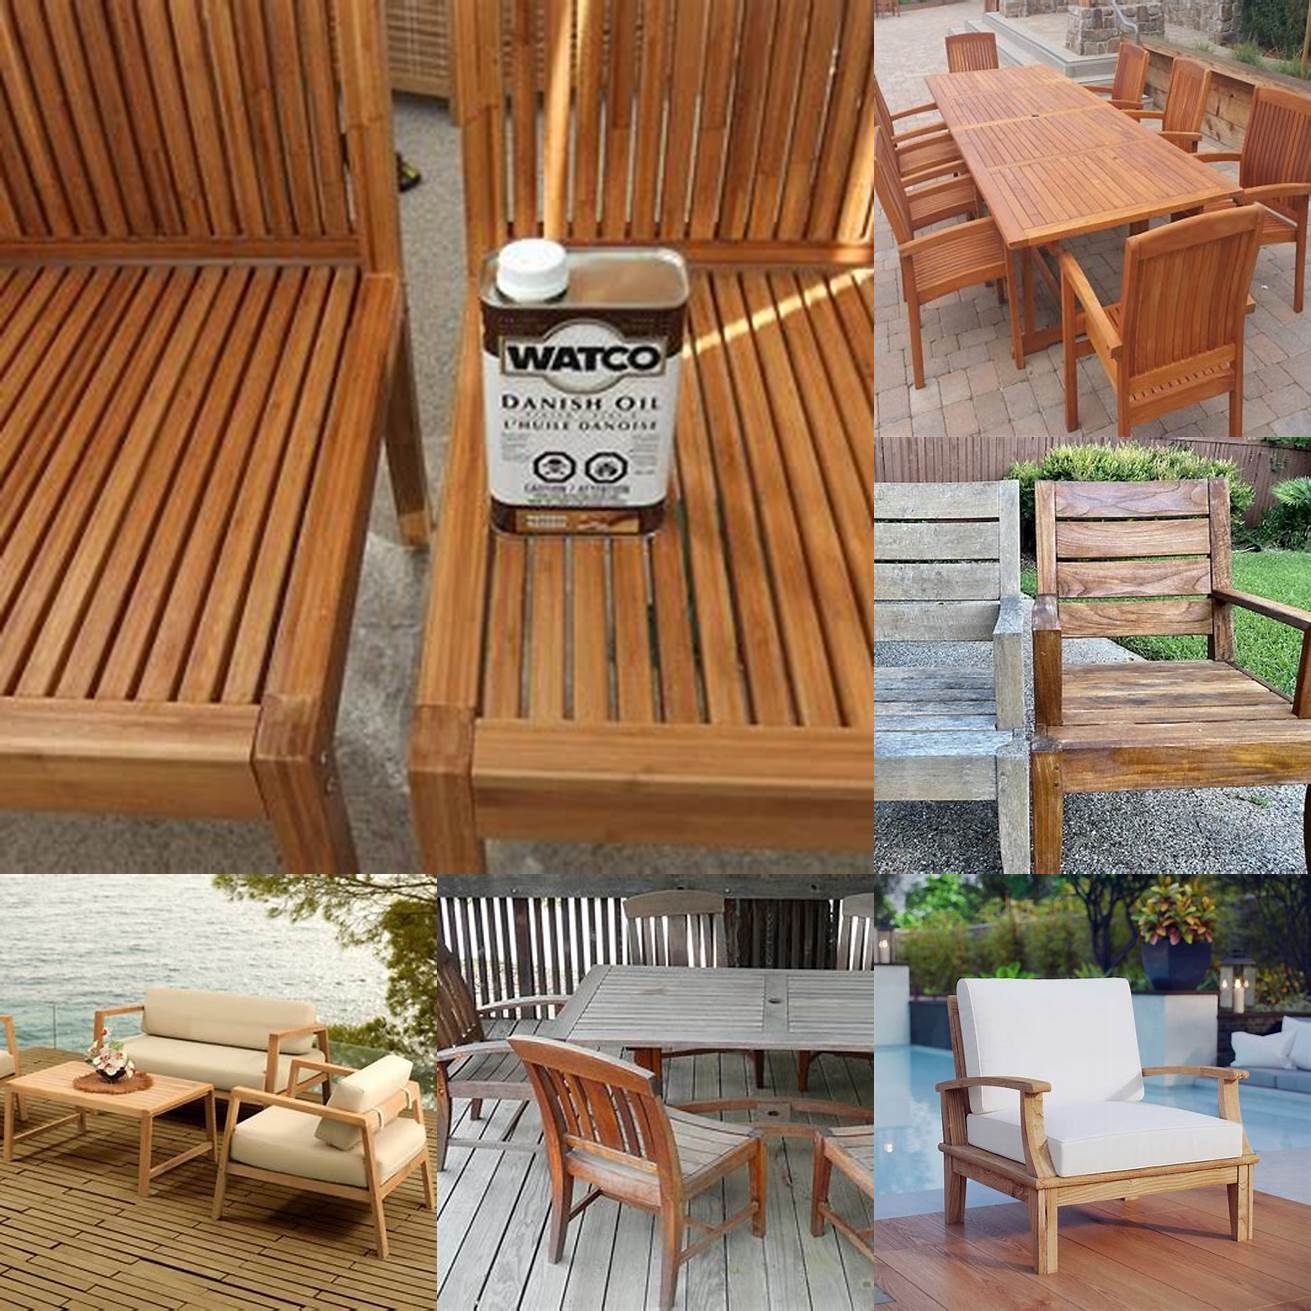 Teak furniture in a dry environment